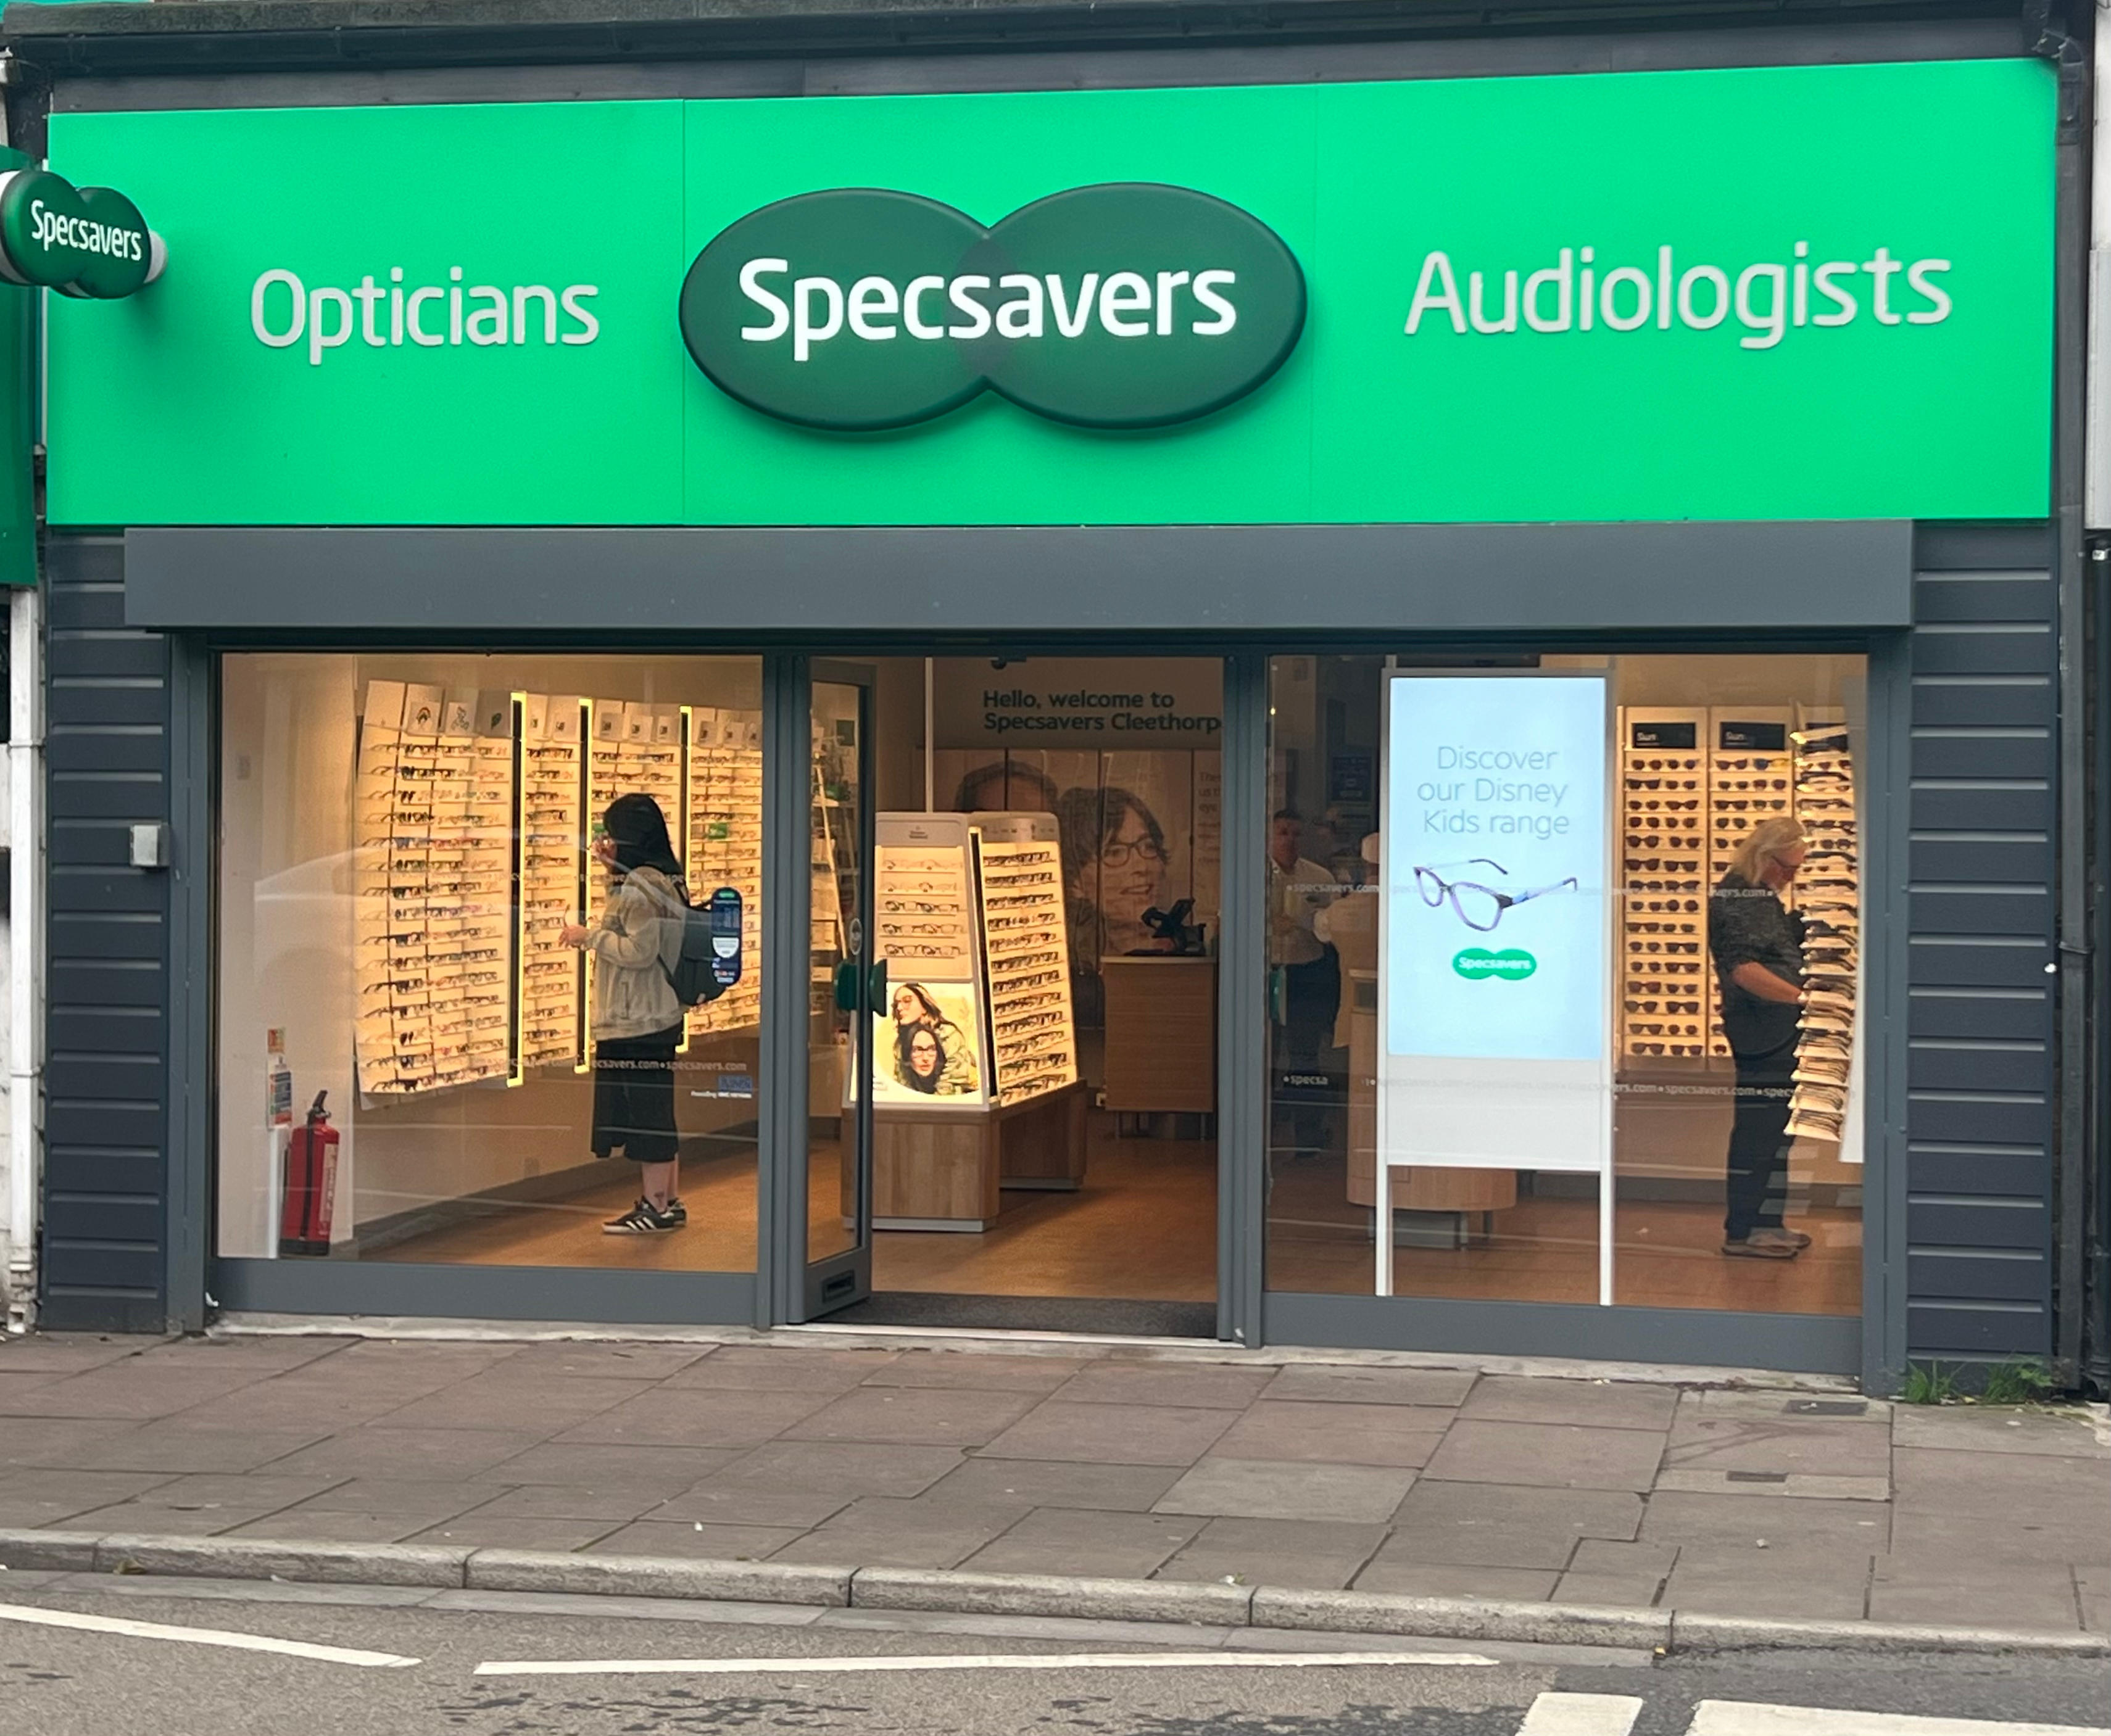 Specsavers Cleethorpes Specsavers Opticians and Audiologists - Cleethorpes Cleethorpes 01472 608840